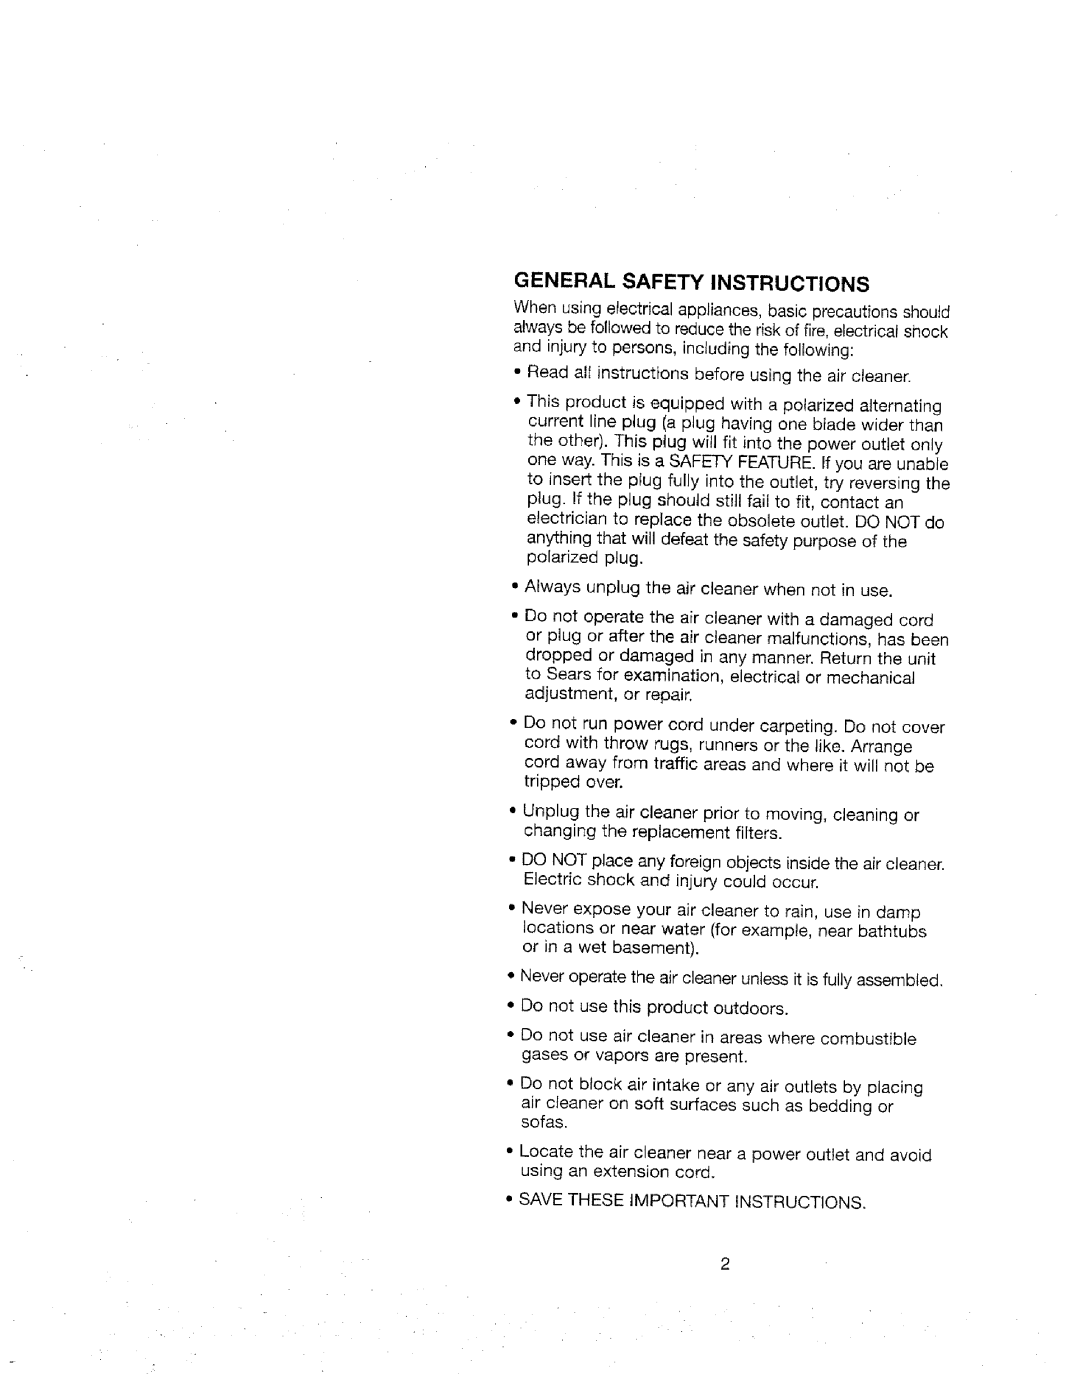 Sears 437.83235 owner manual General Safety Instructions 